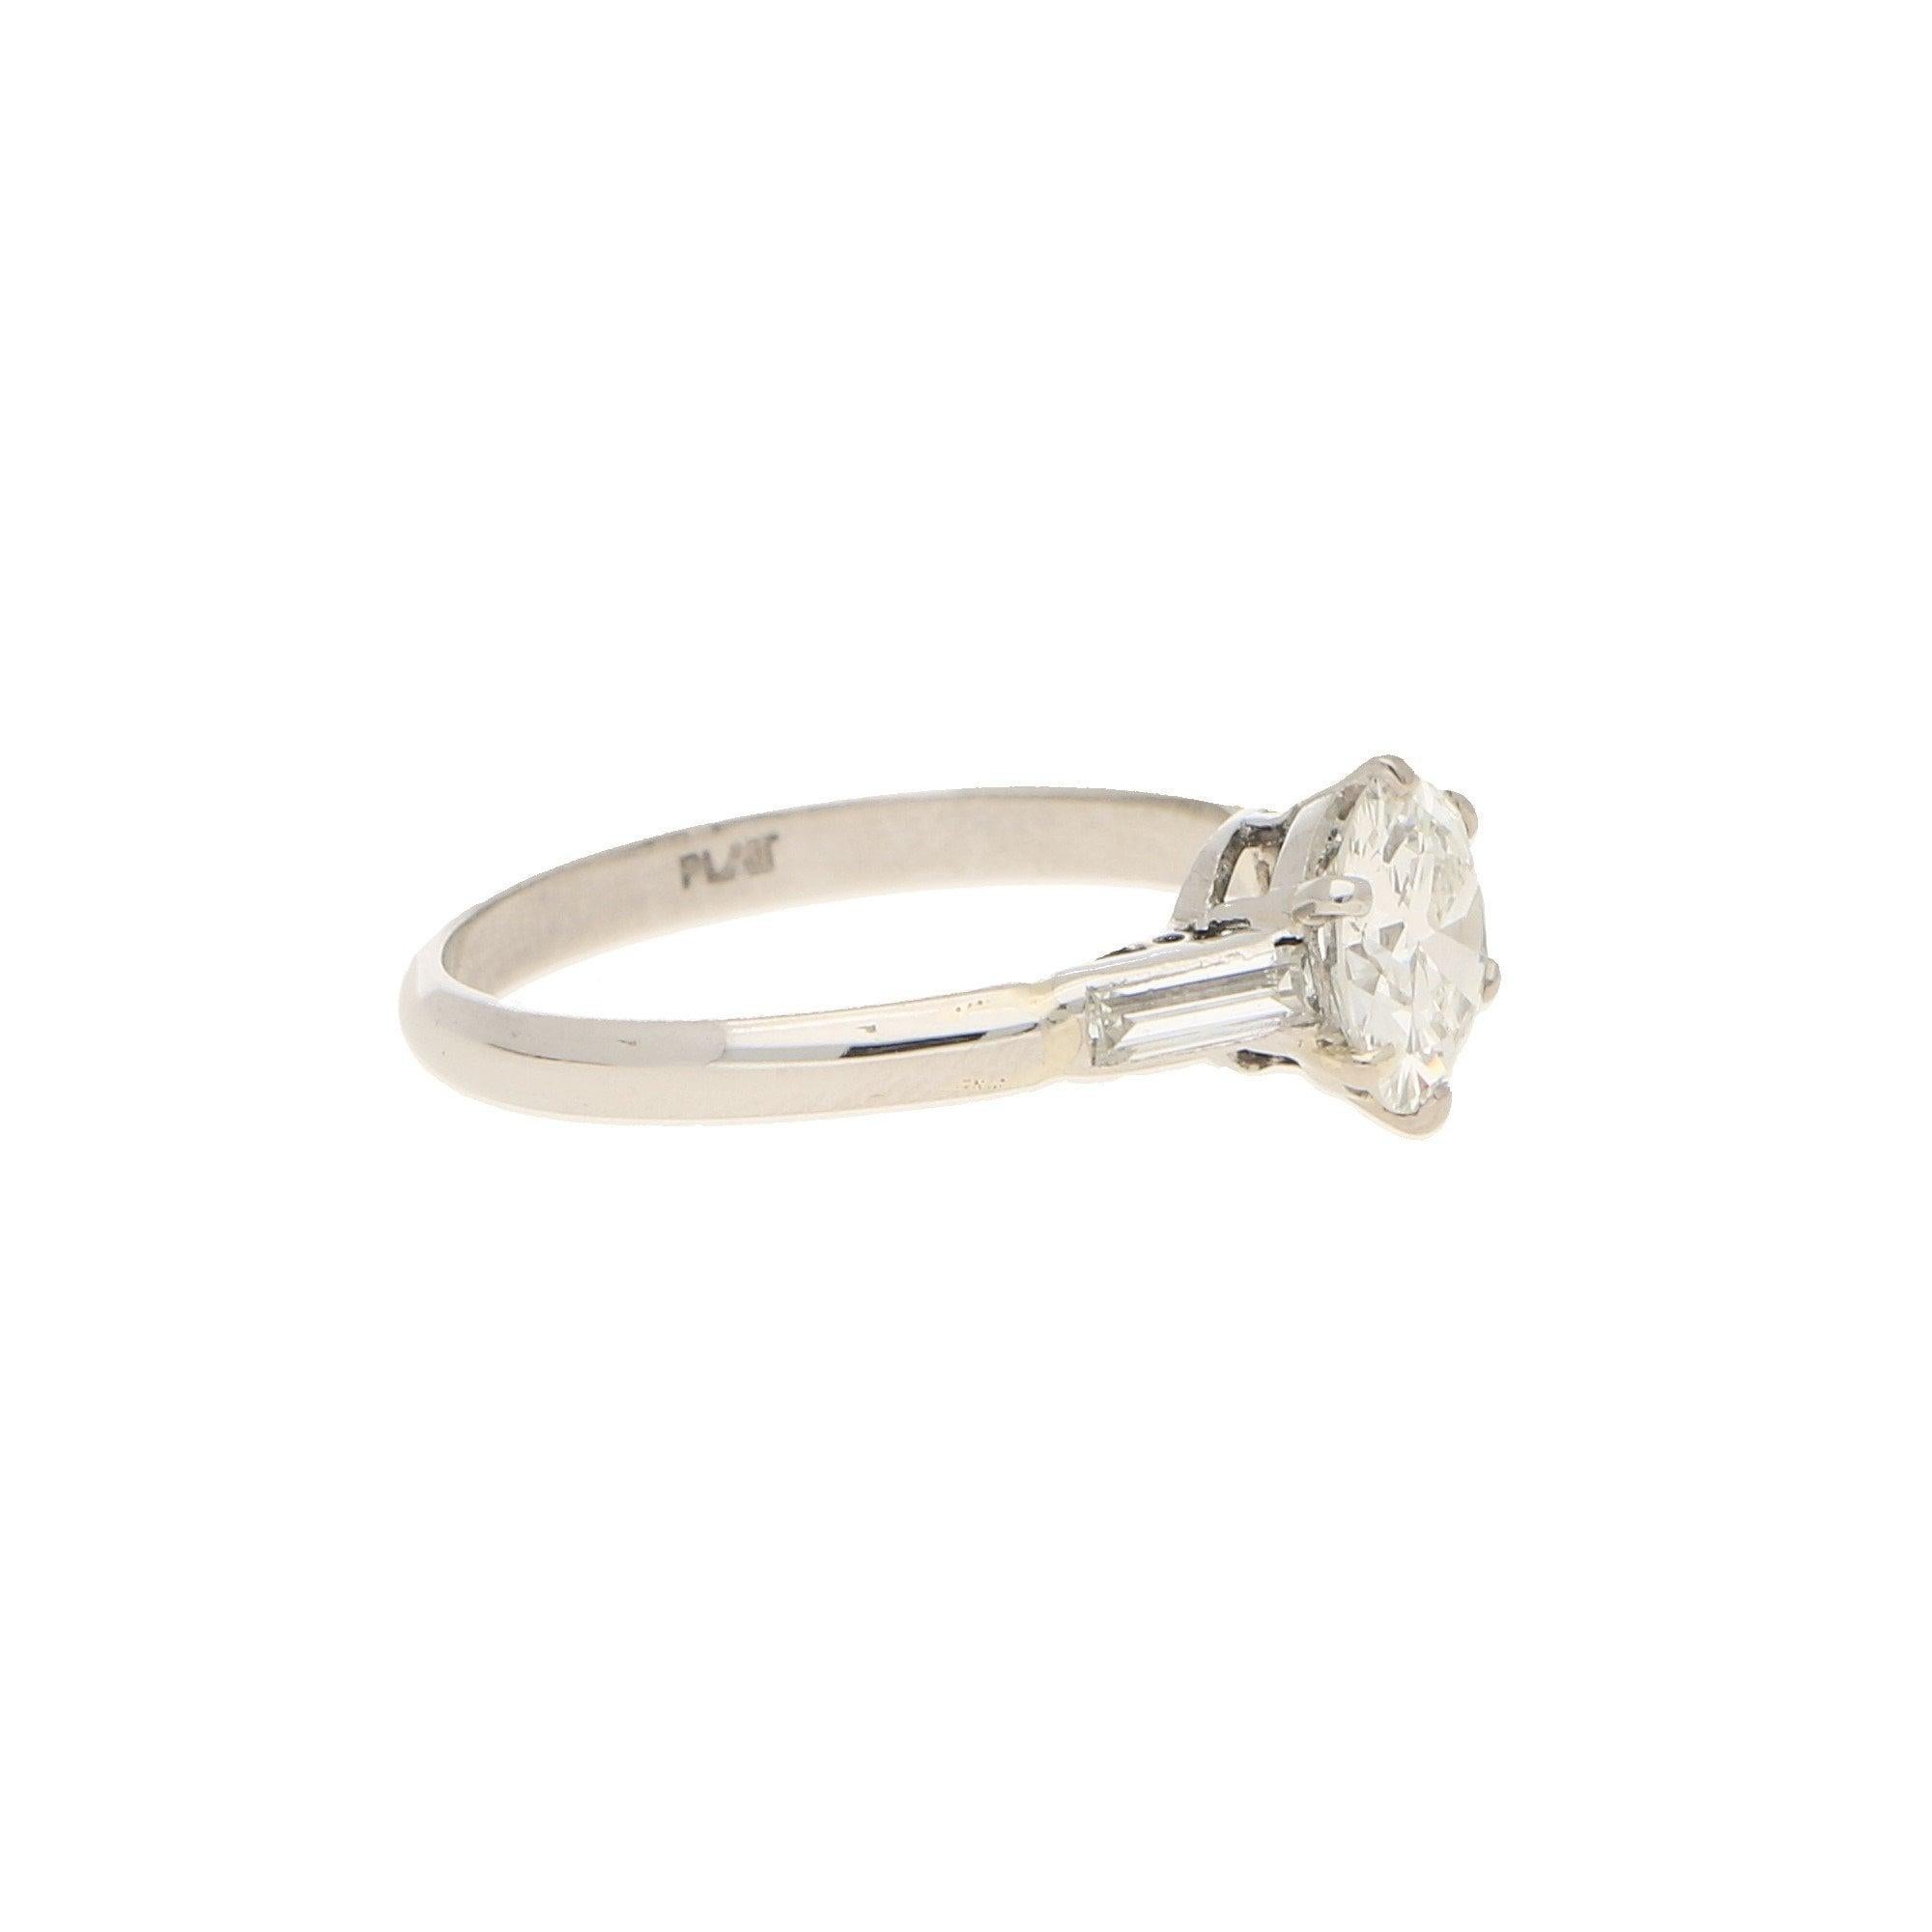 A beautiful old European brilliant cut solitaire diamond engagement ring set in platinum. The piece centrally features a certified old European brilliant-cut diamond which is six-claw-set in an open-back basket collet. This is then shouldered with